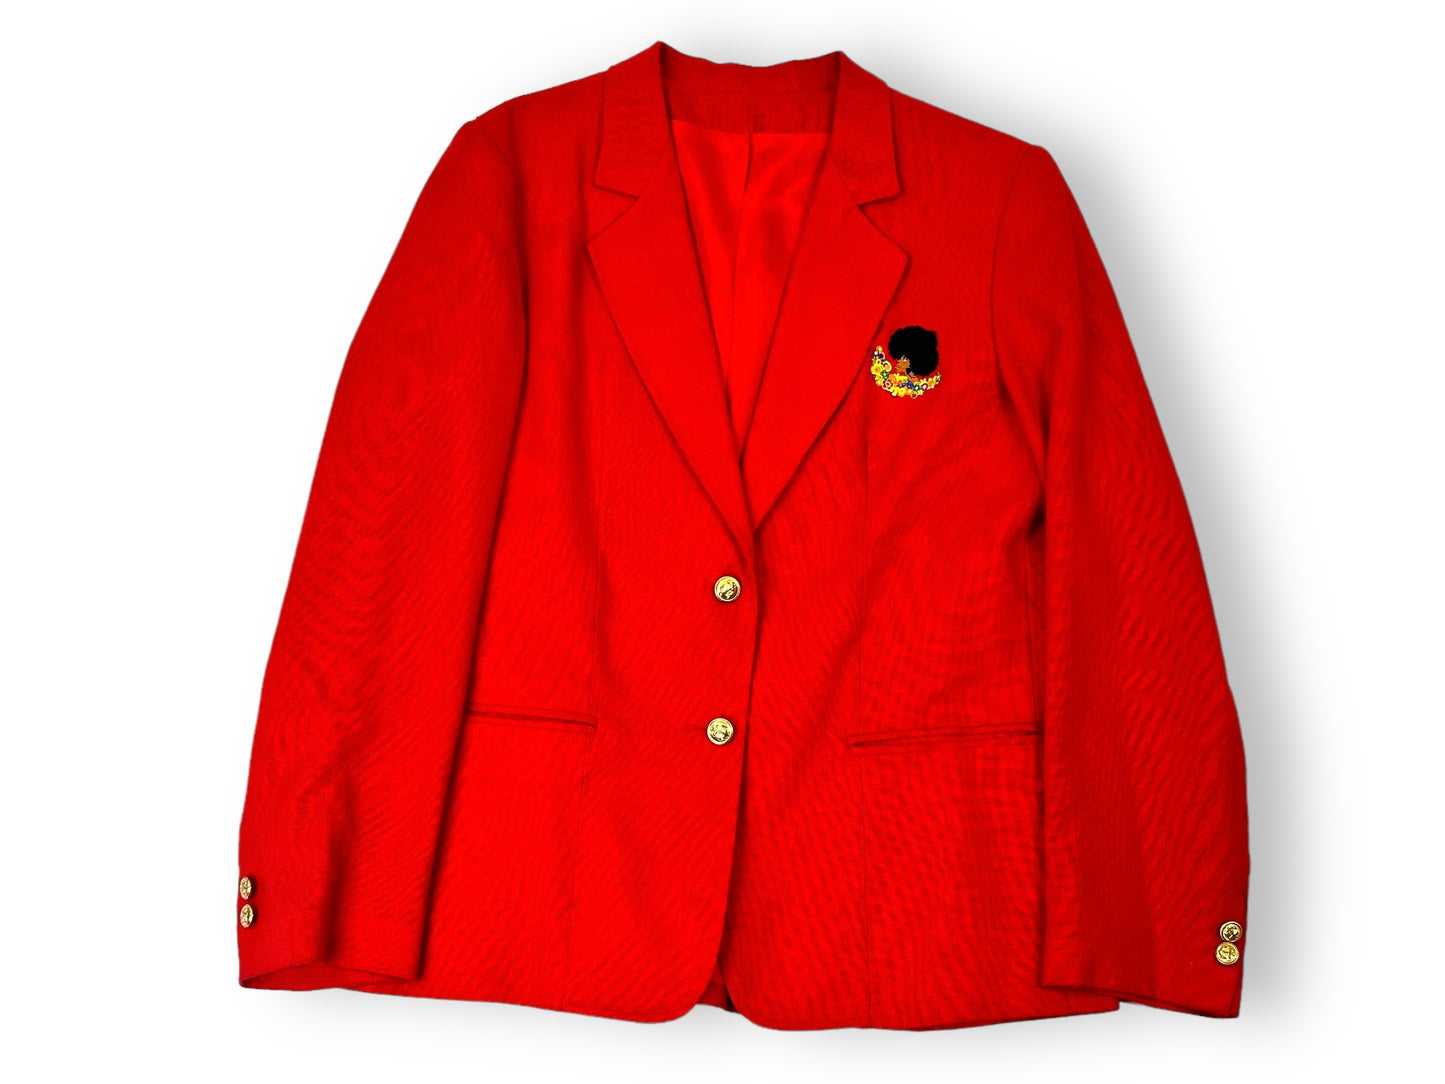 Andersonville: Kameo Up cycled Red Blazer